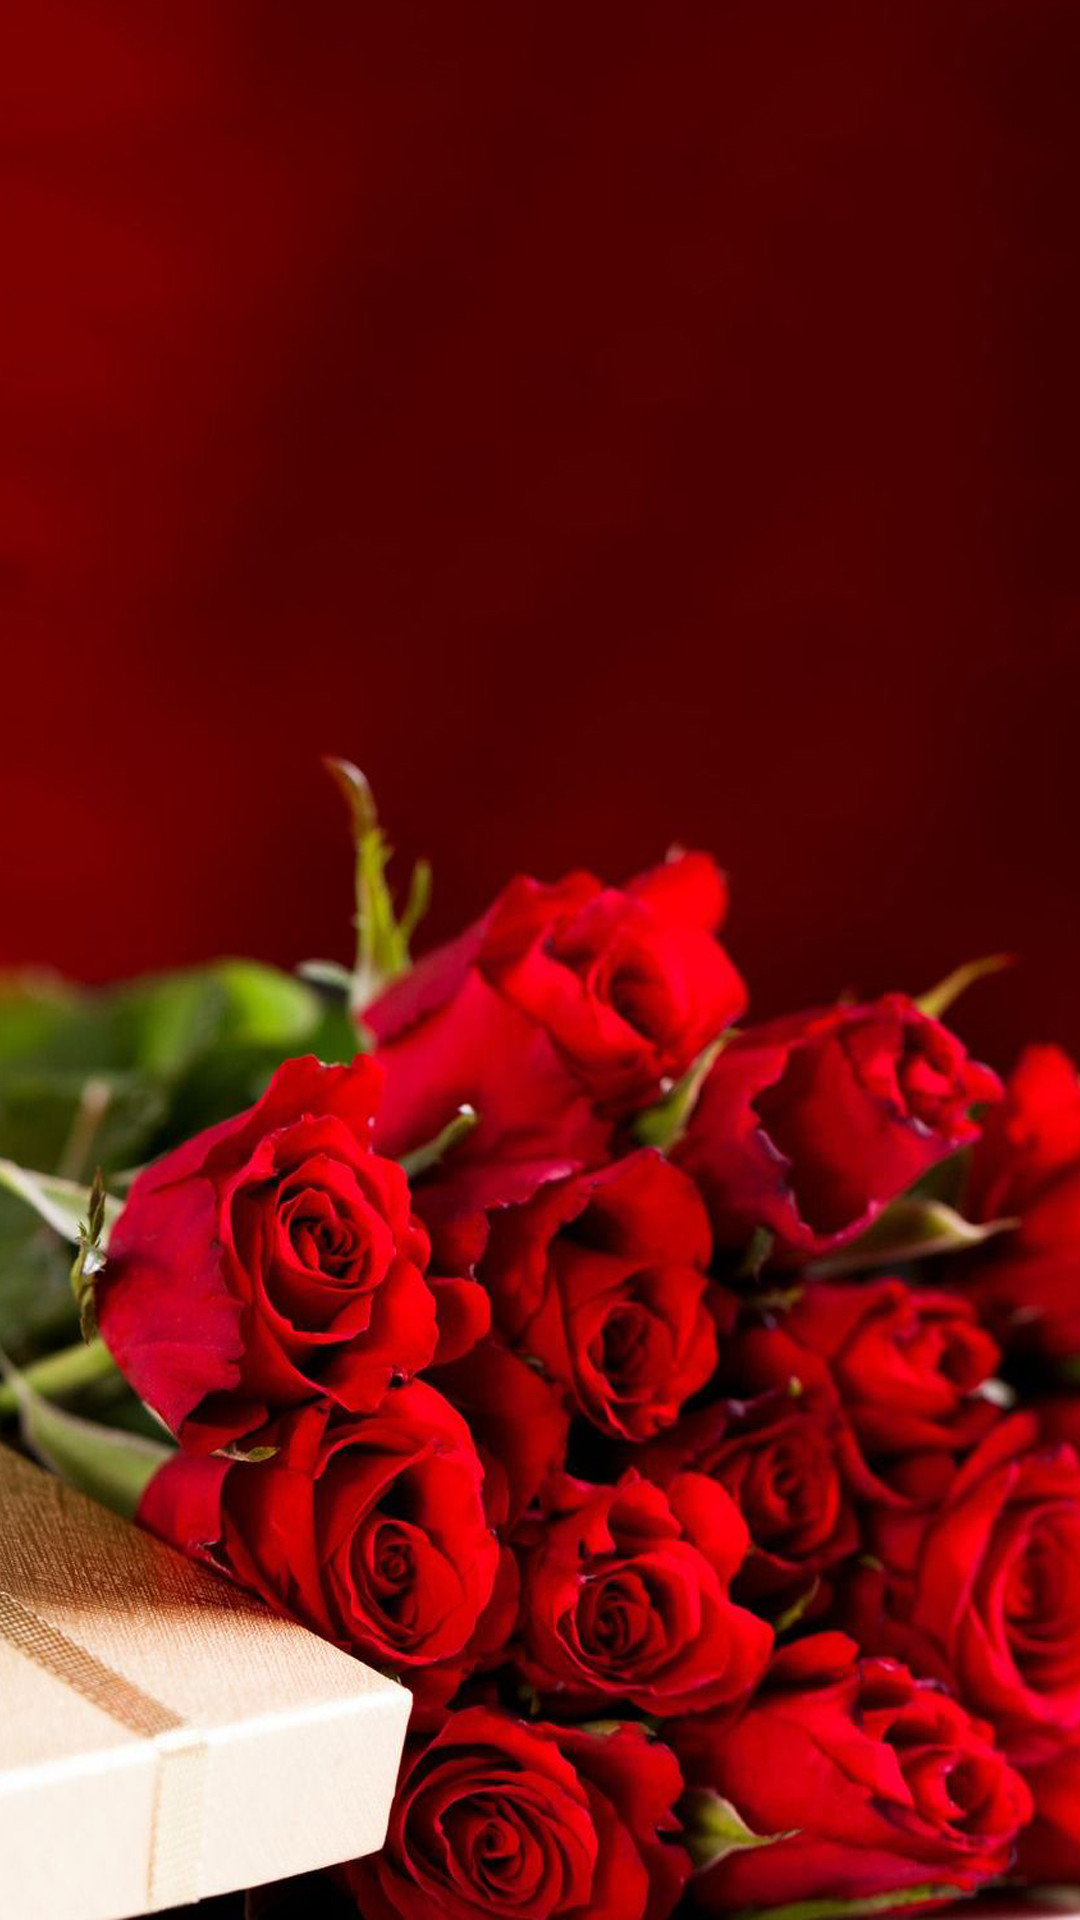 1080x1920 ...  Roses Bouquet Valentines Day Gift Android Wallpaper free  download